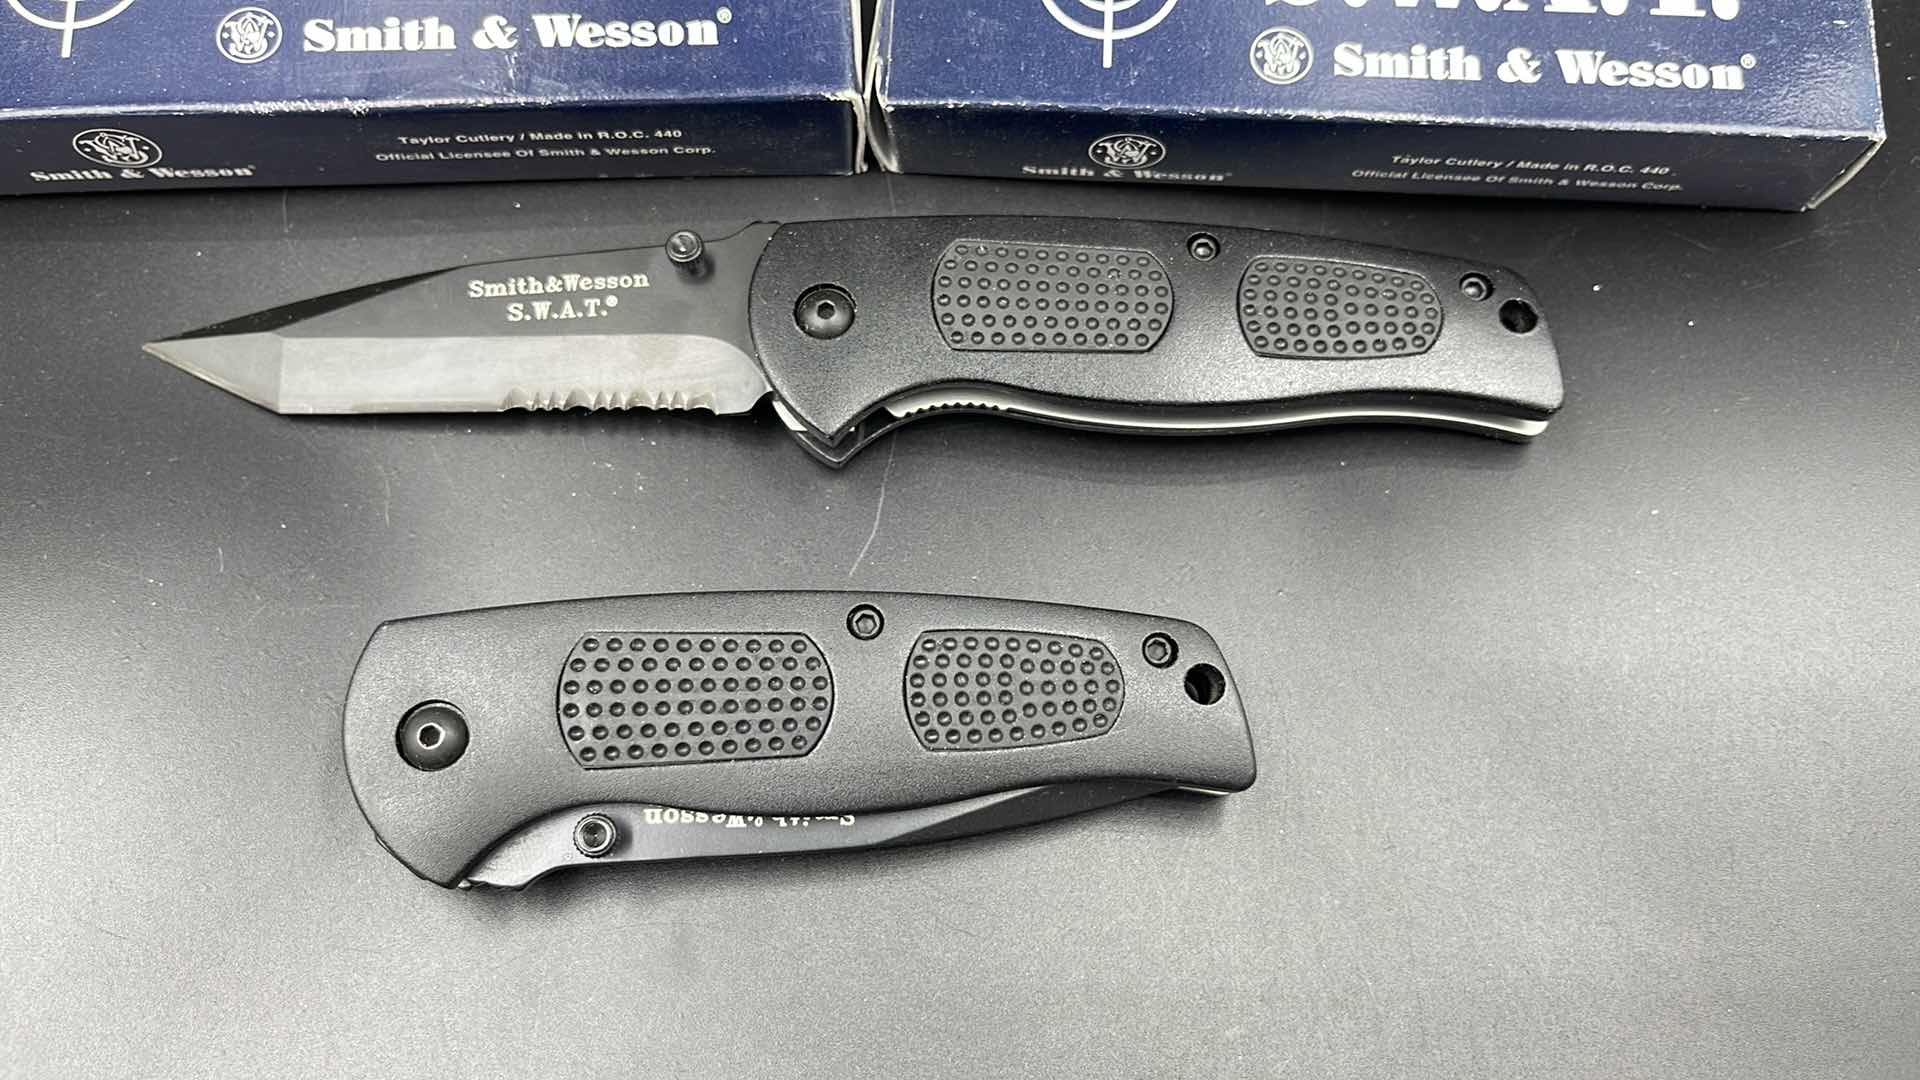 Photo 2 of 2 PC SMITH & WESSON S.W.A.T. KNIFE SW114